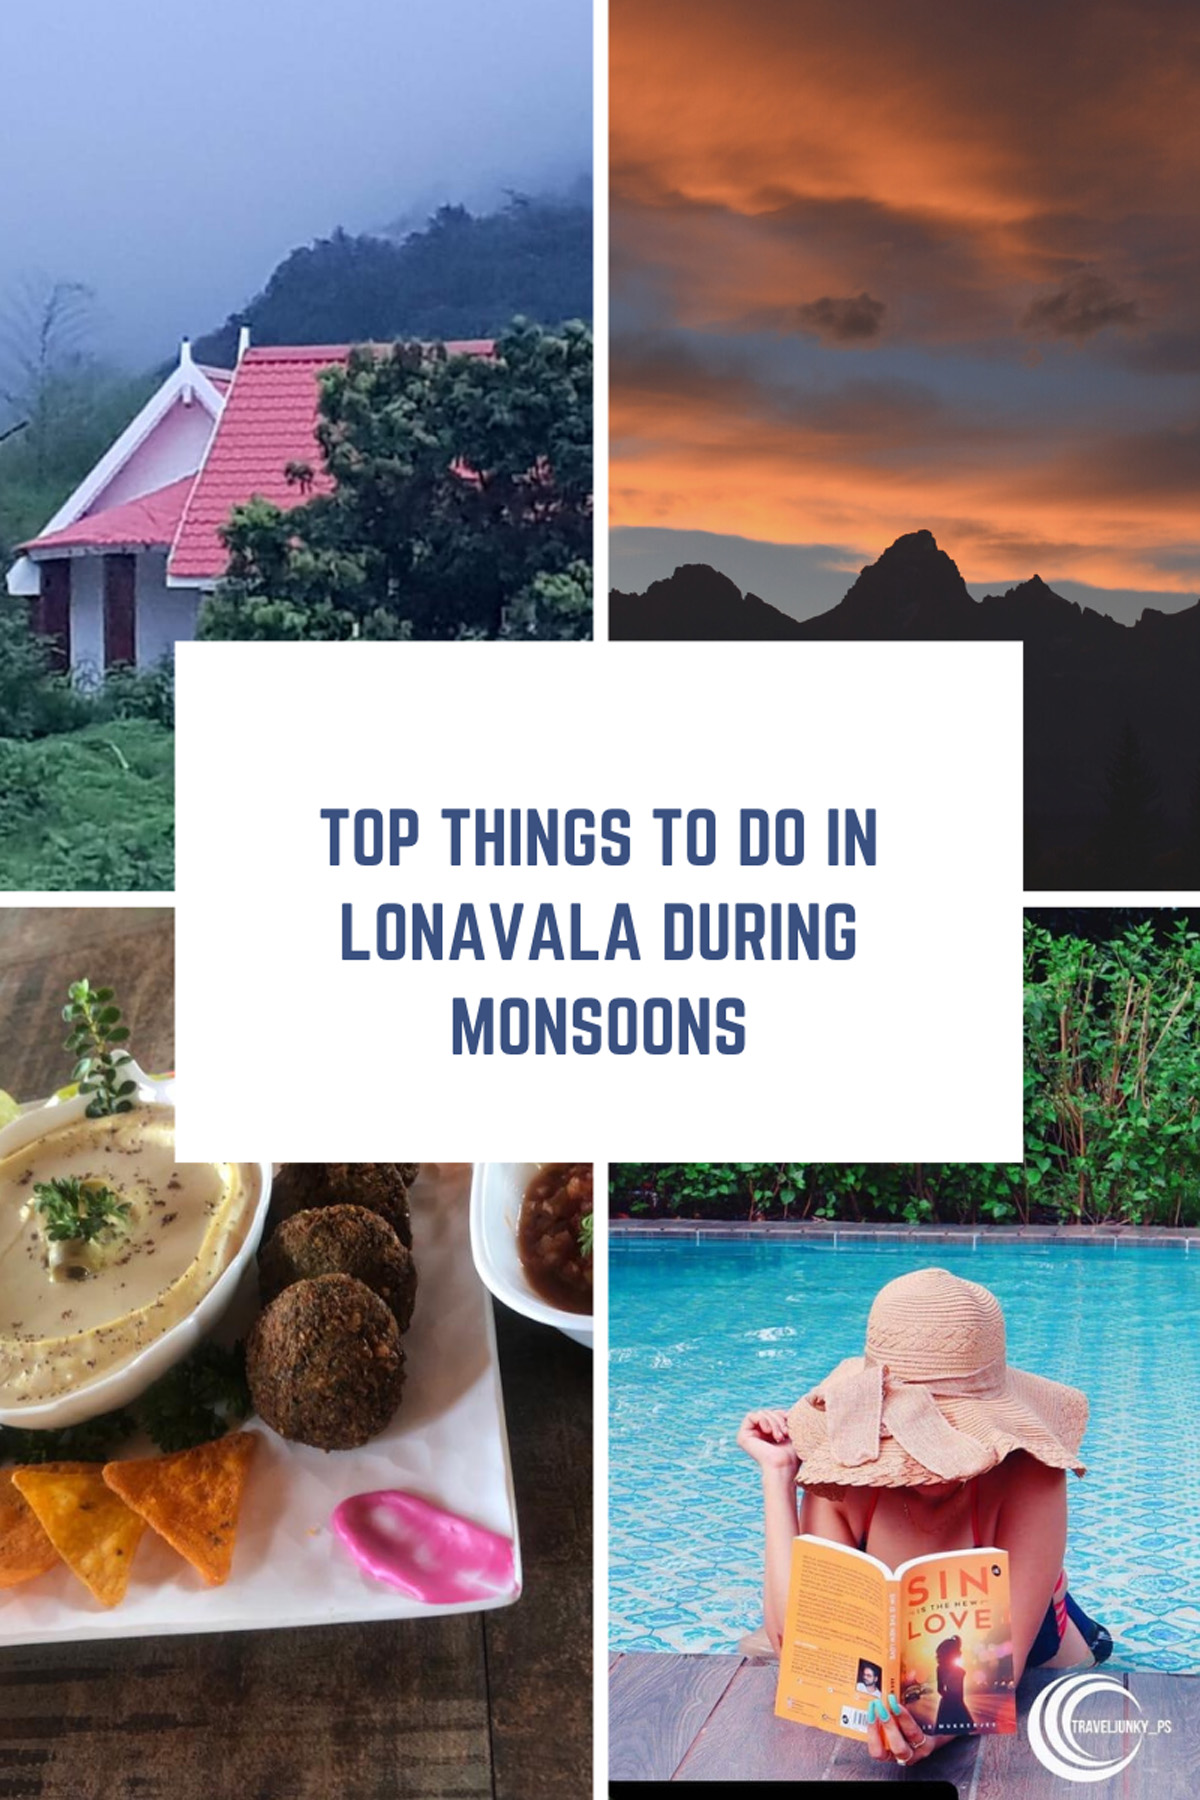 Top things to do in Lonavala during monsoons